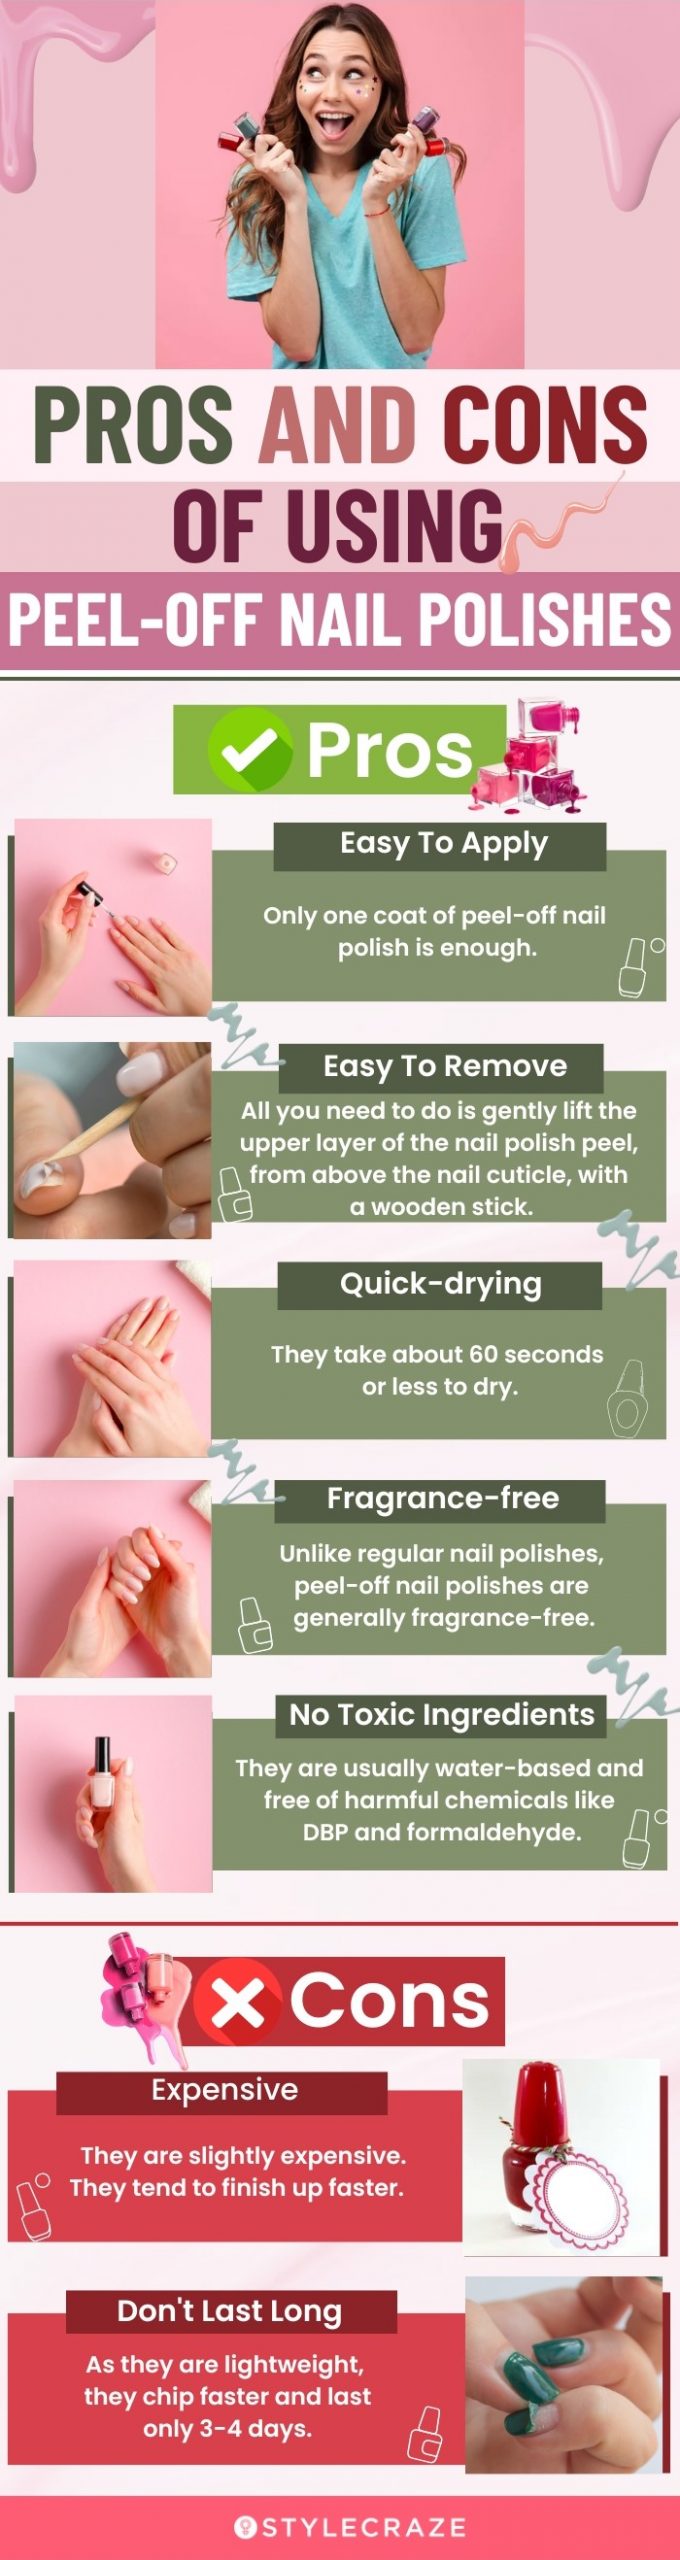 Pros & Cons Of Using Peel-Off Nail Polish (infographic)